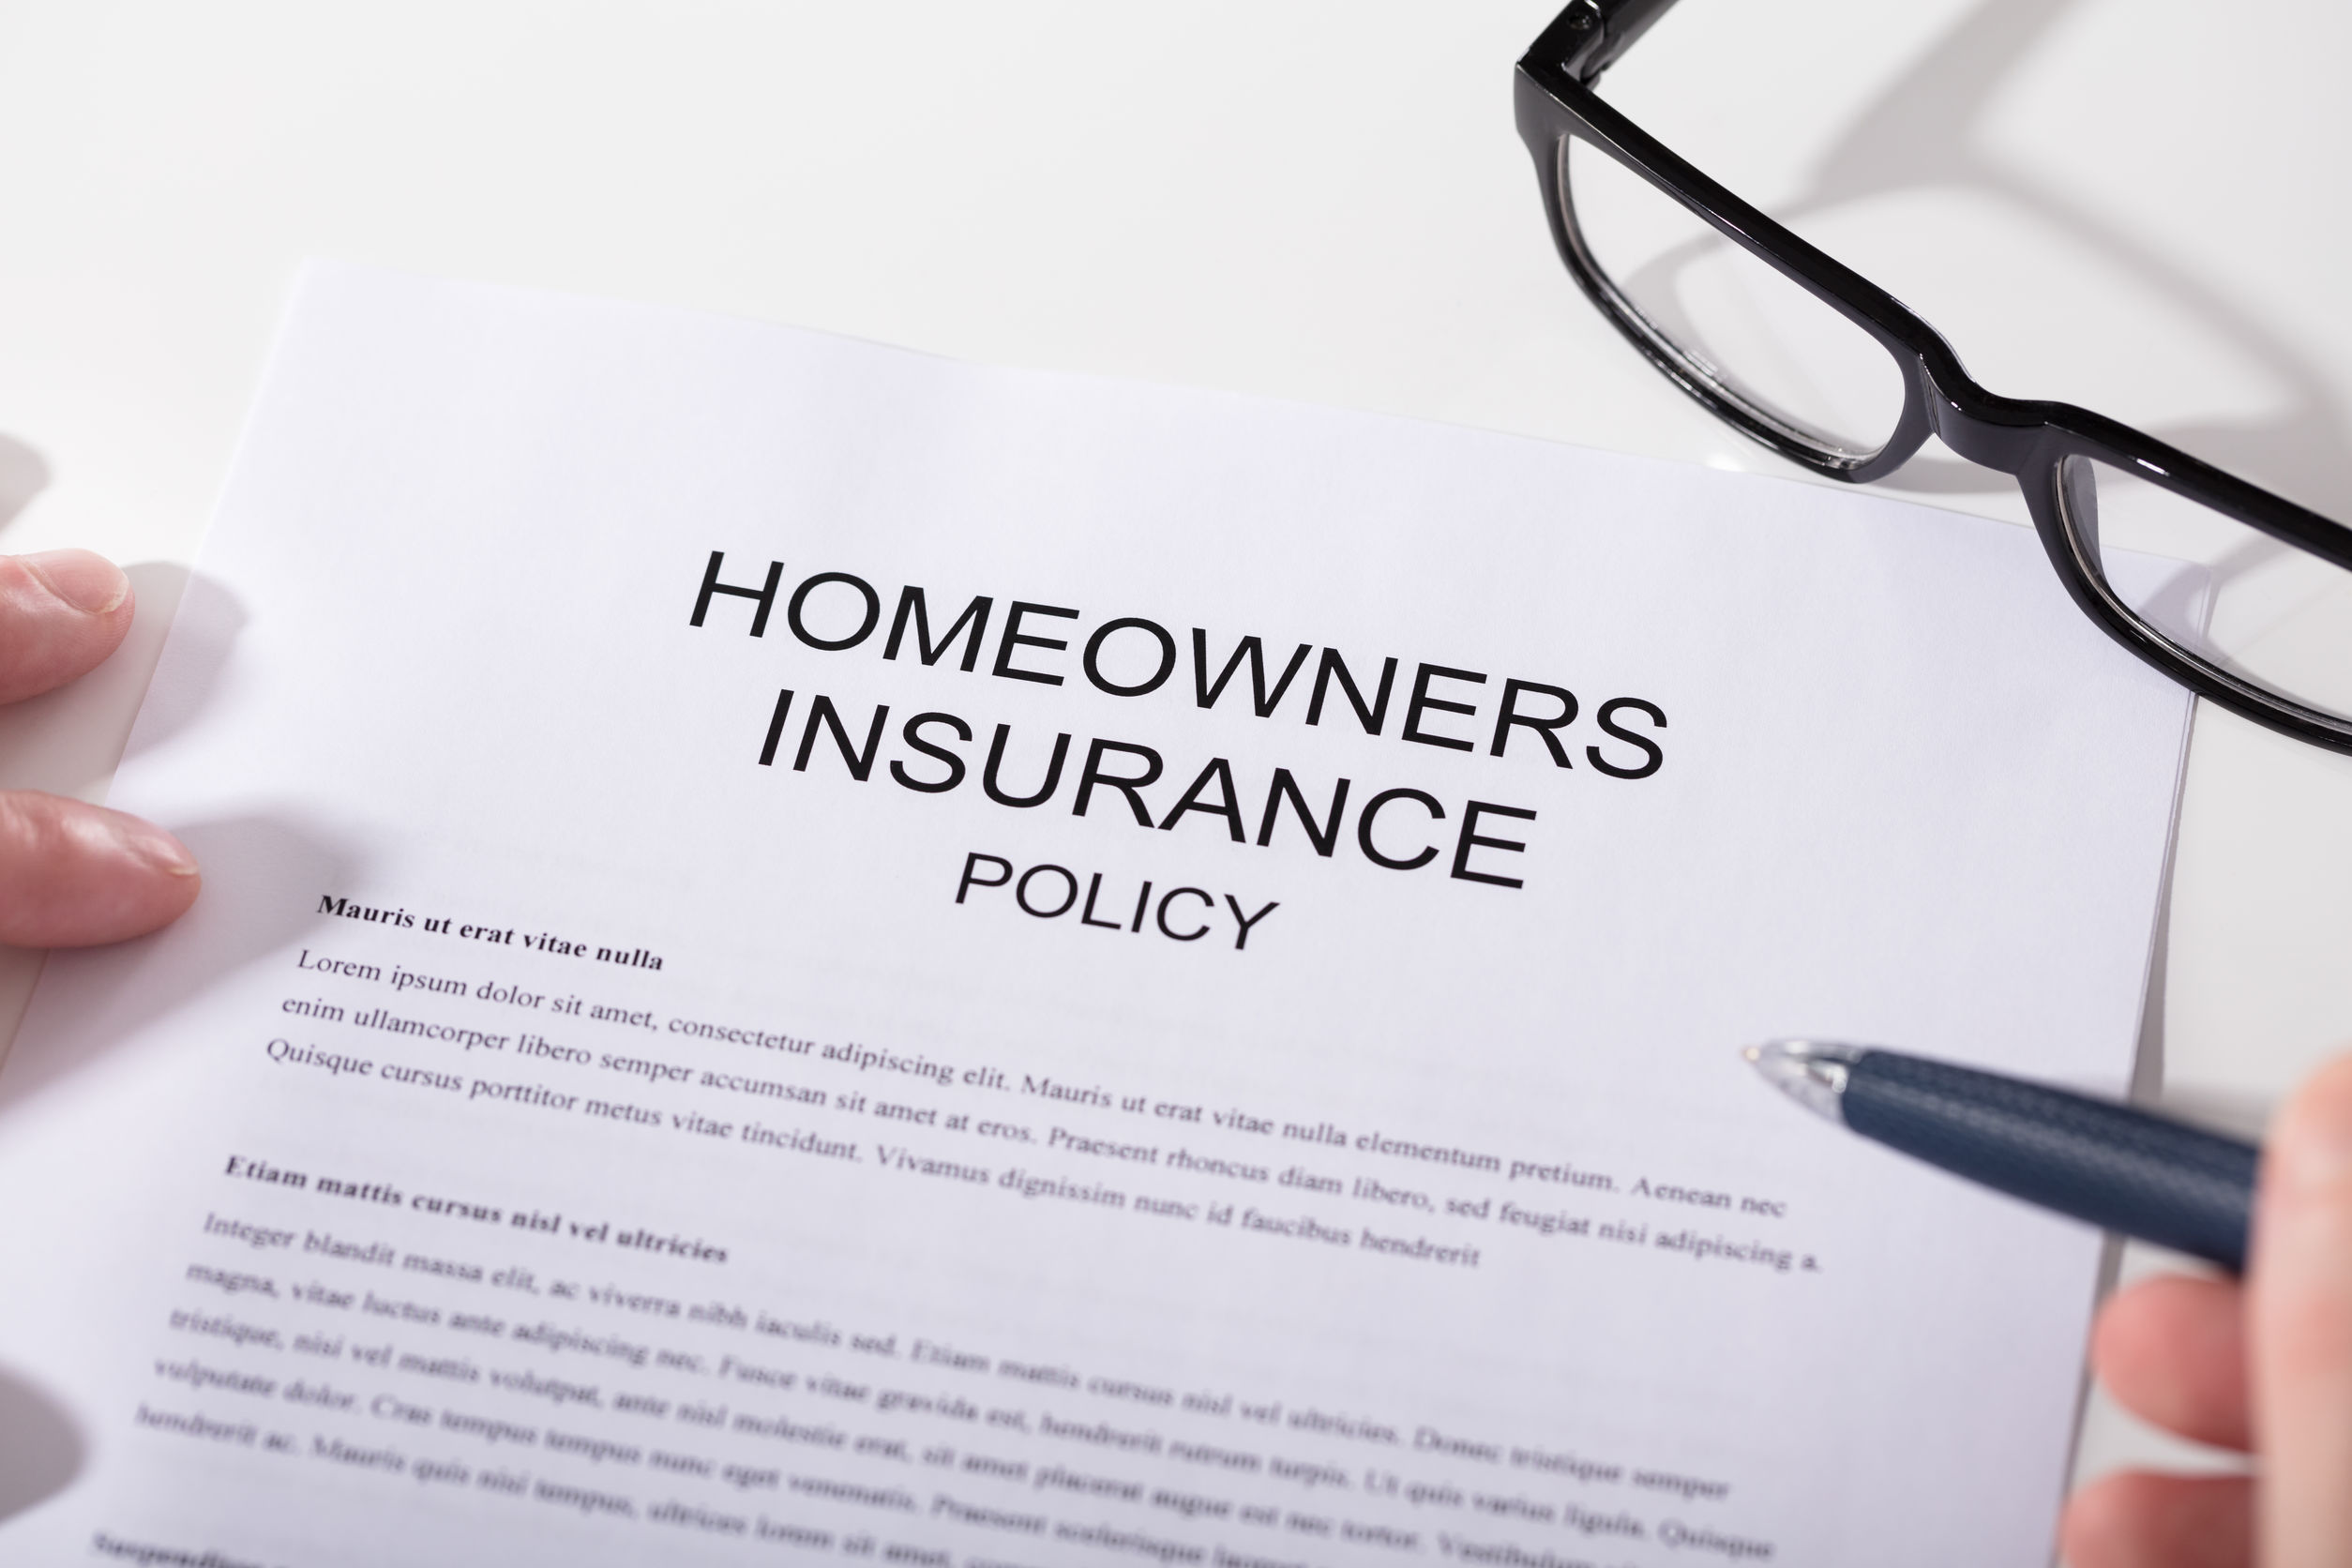 Filing a Homeowners Insurance Claim in FL? Know Your Rights